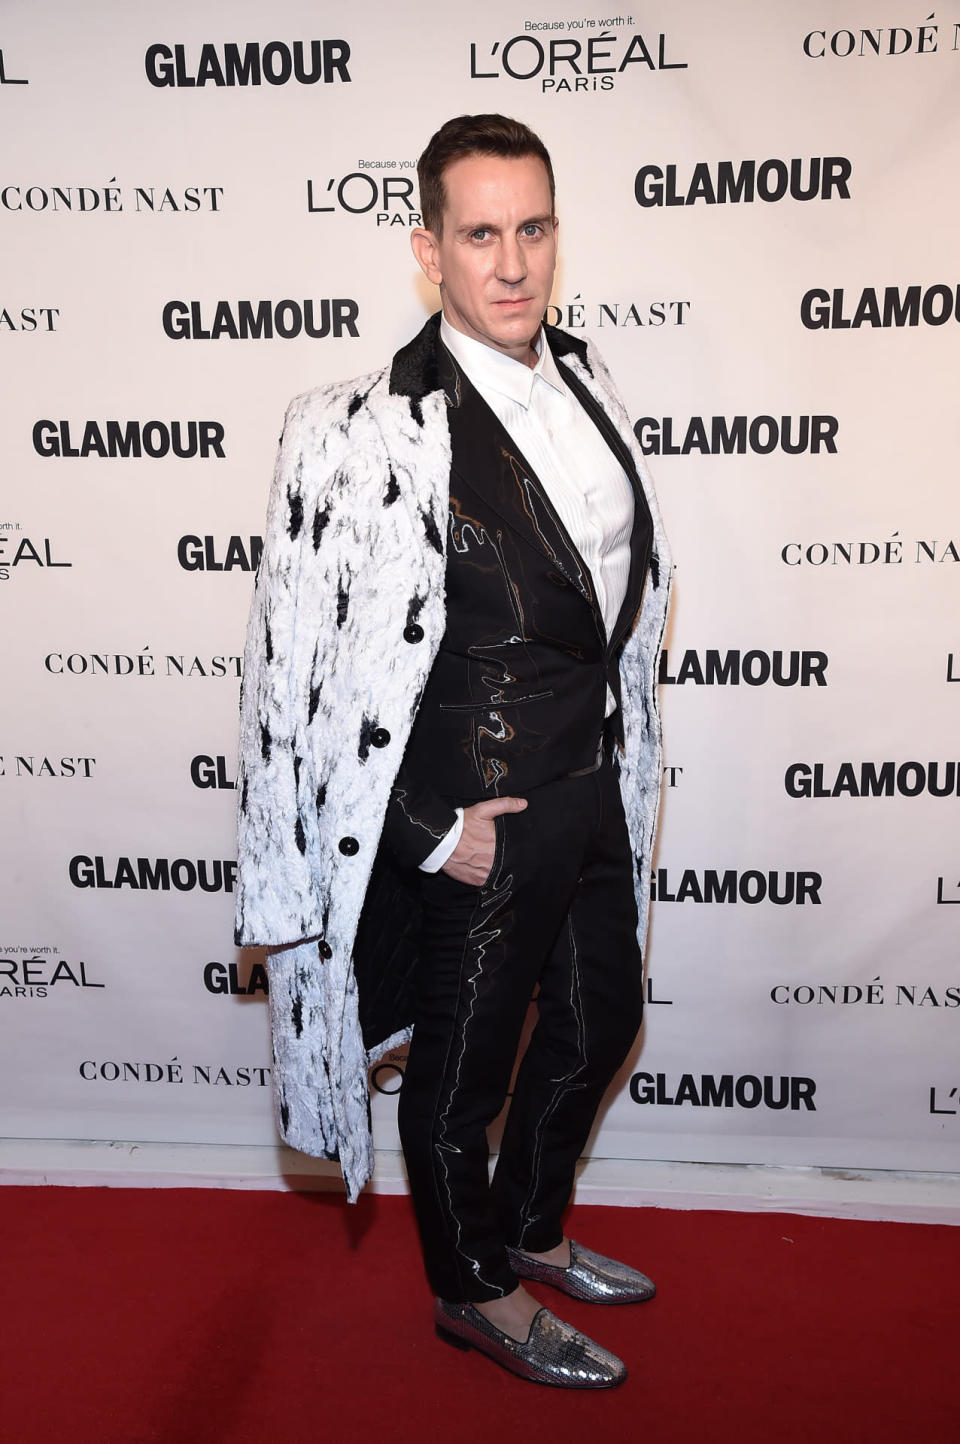 Jeremy Scott in a metallic suit of his own design at the 2015 Glamour Women Of The Year Awards.